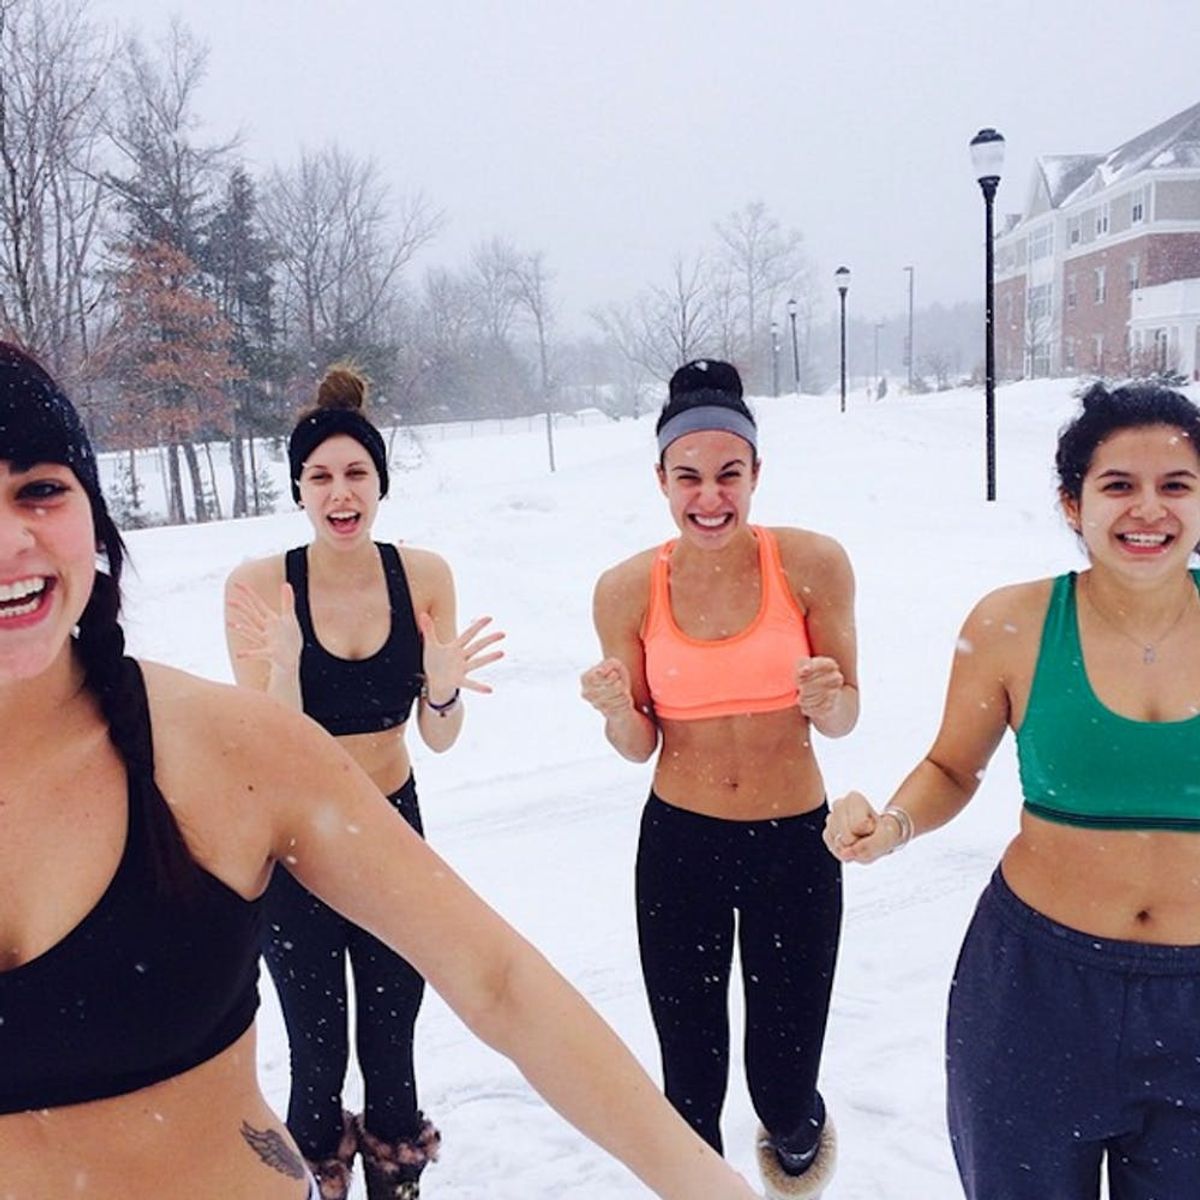 20 People Who Made #Stormageddon the Best Snow Day Ever